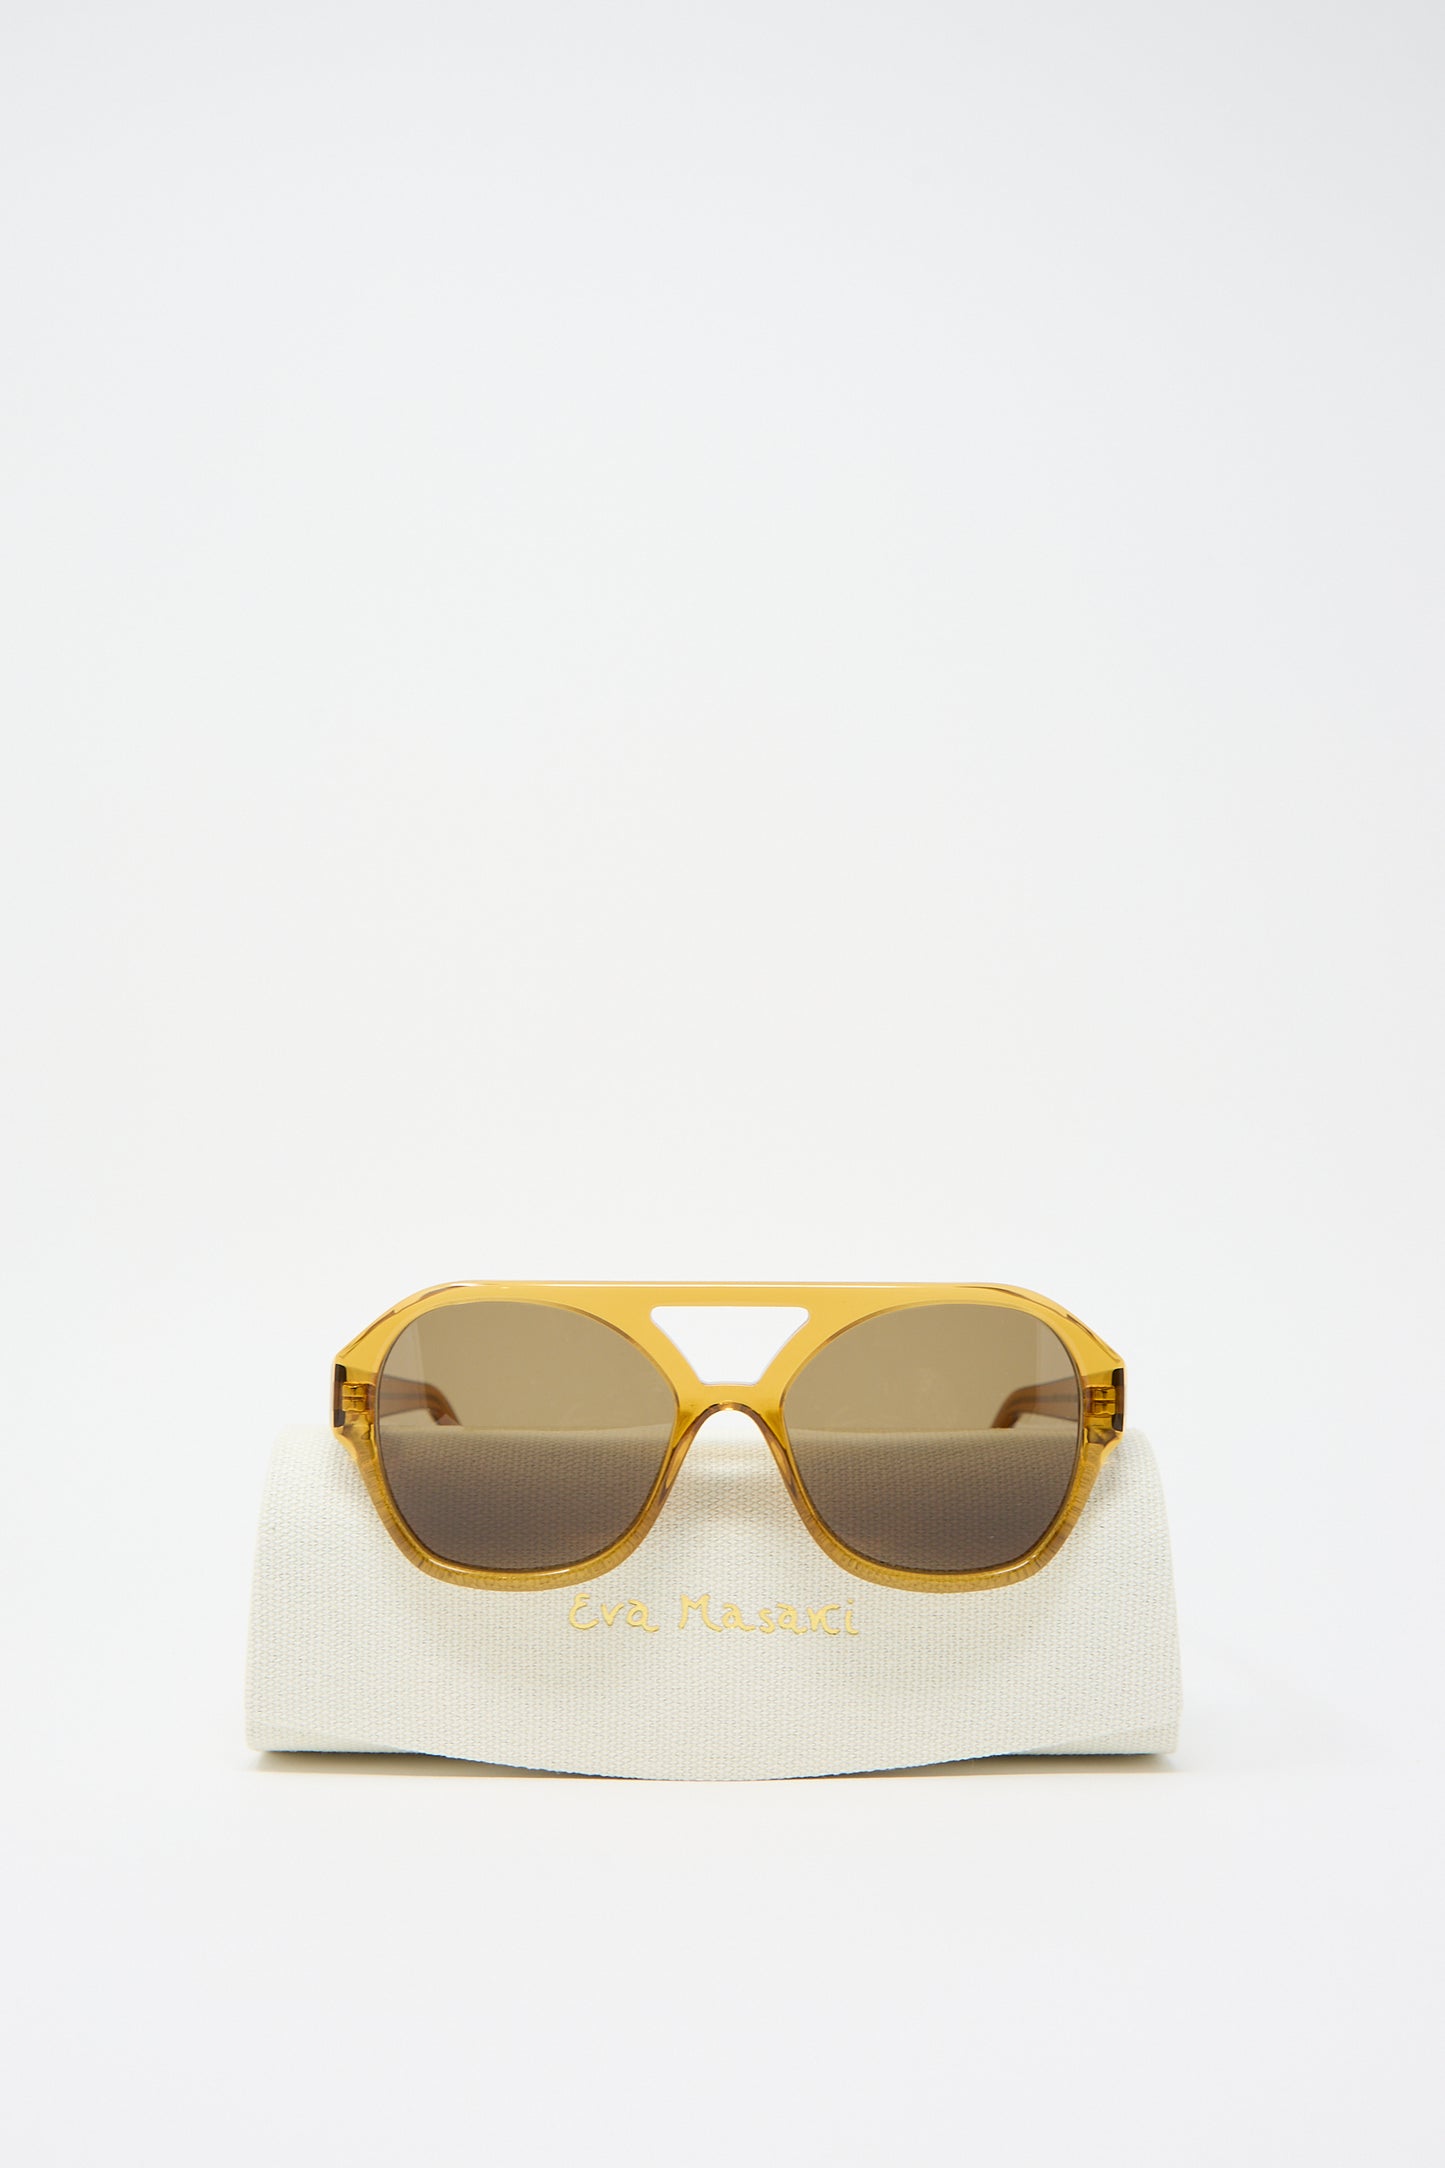 Chiyo Aviator Sunglasses in Honey by Eva Masaki are displayed on a white case with gold lettering against a plain white background, showcasing both their stylish design and UV protection.